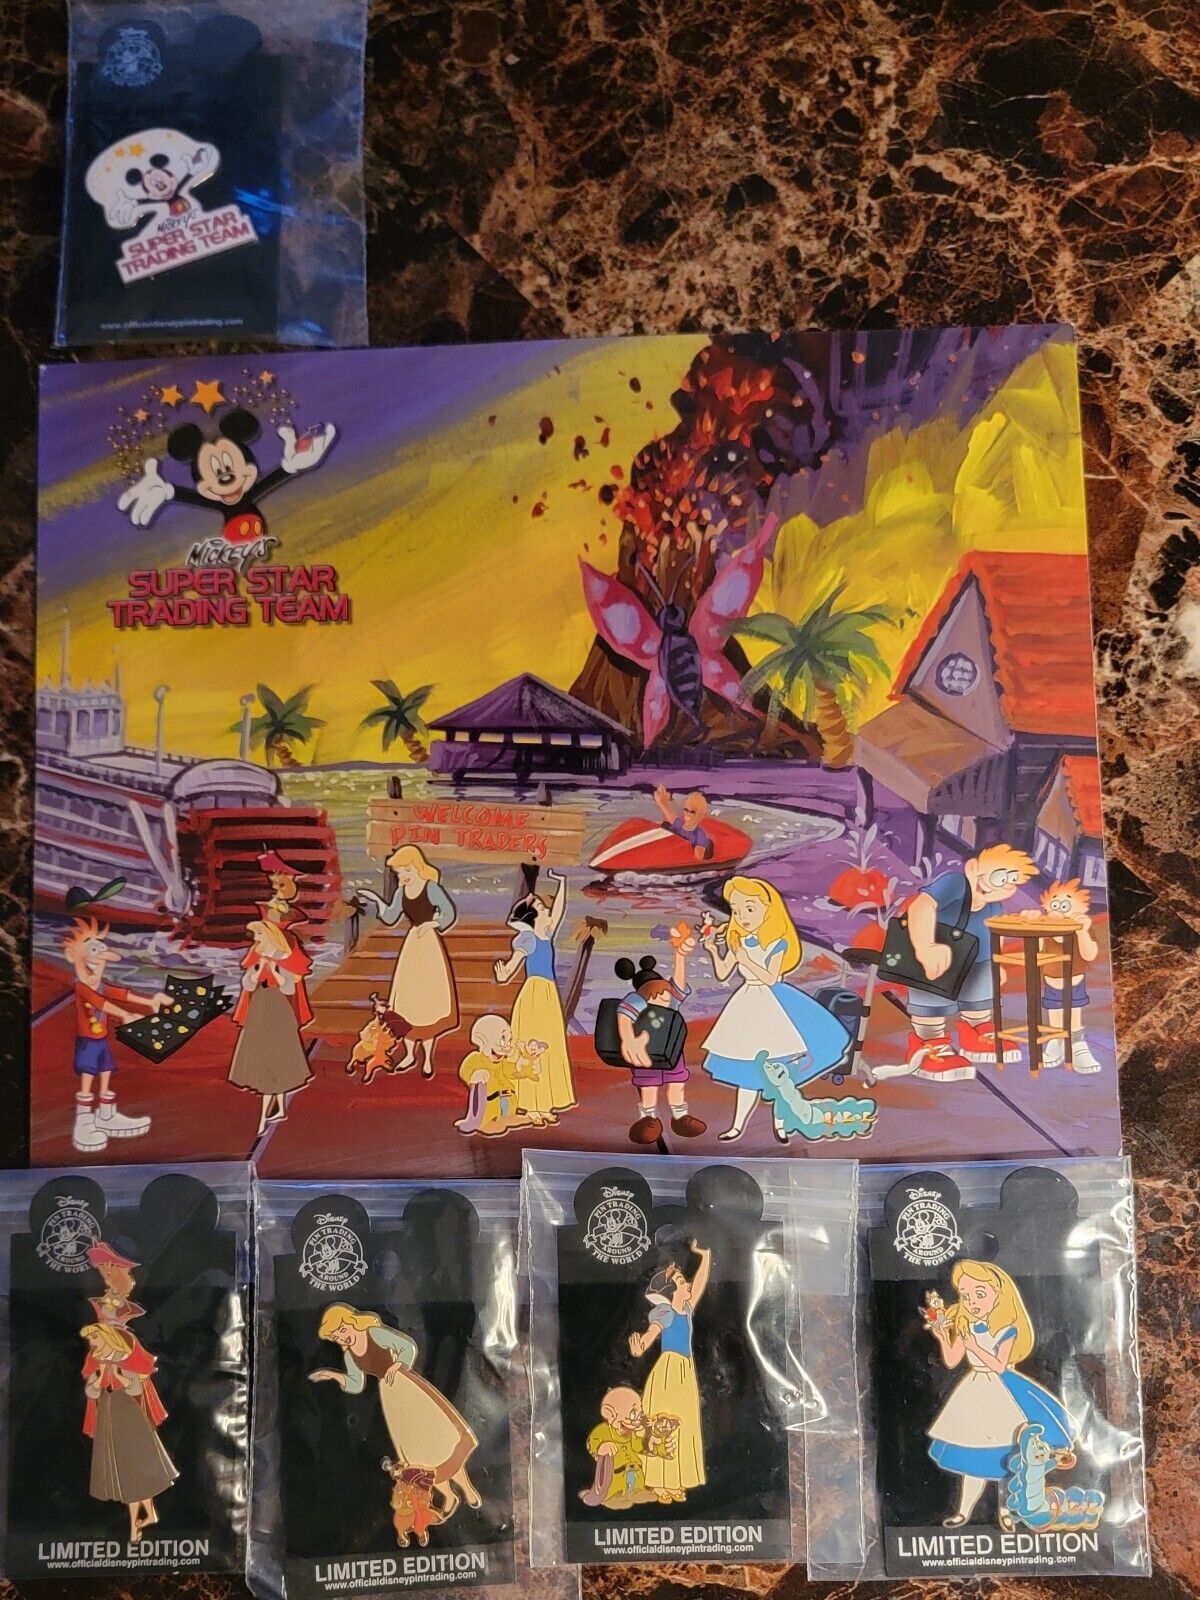 Mickeys Super Star Trading Team LE 2500 - Complete With Card And 5 Pins